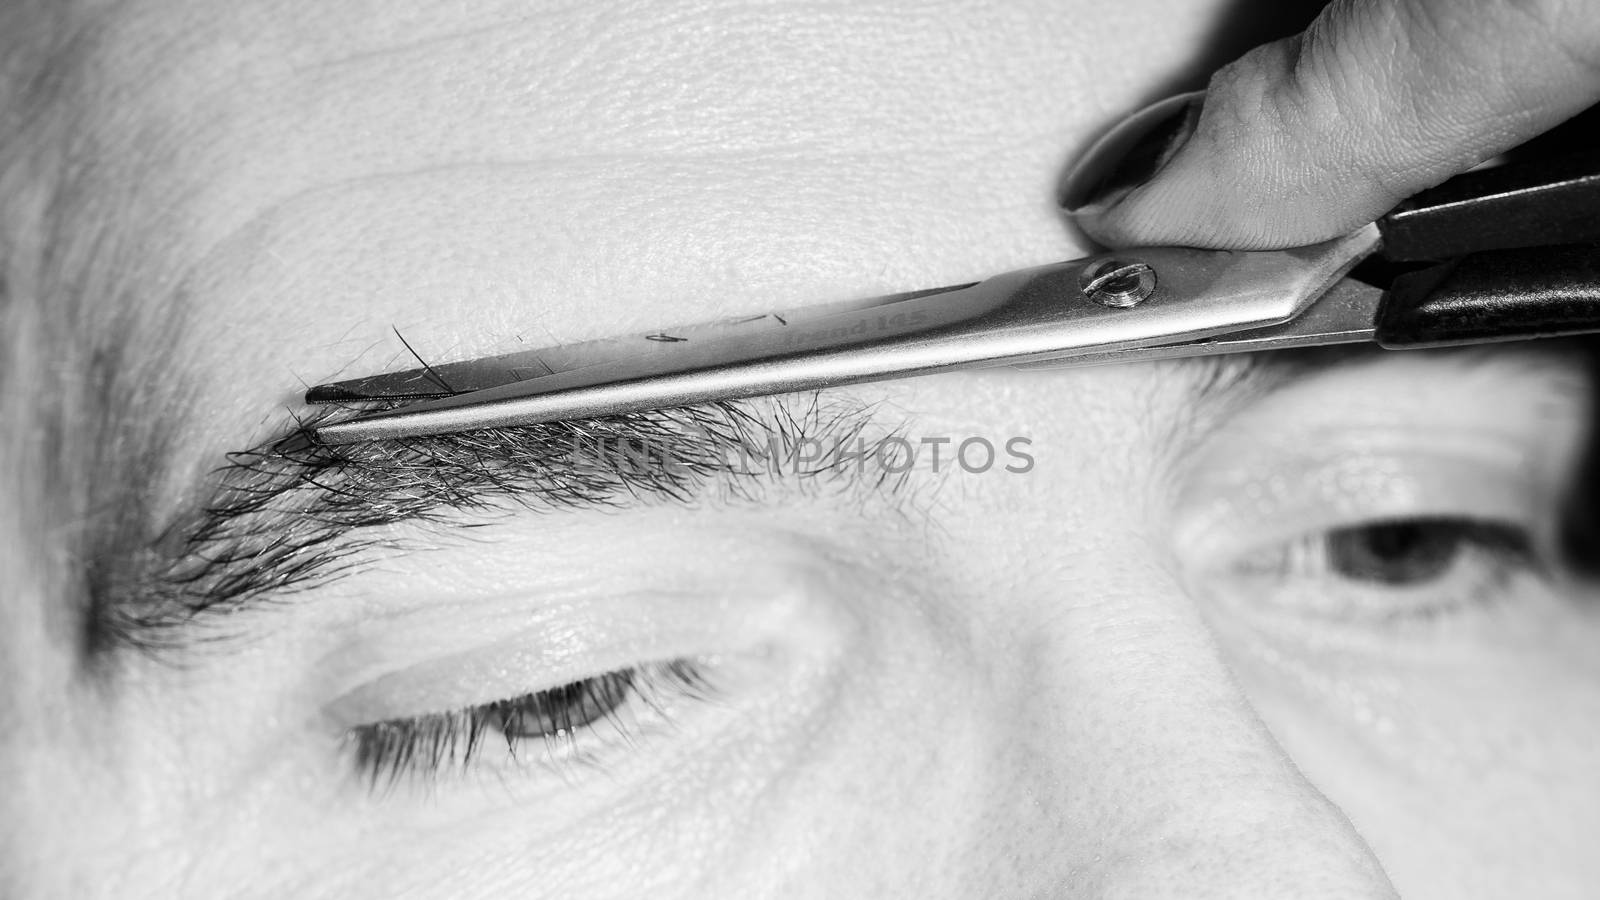 Portrait of man removing eyebrow hairs with scissors